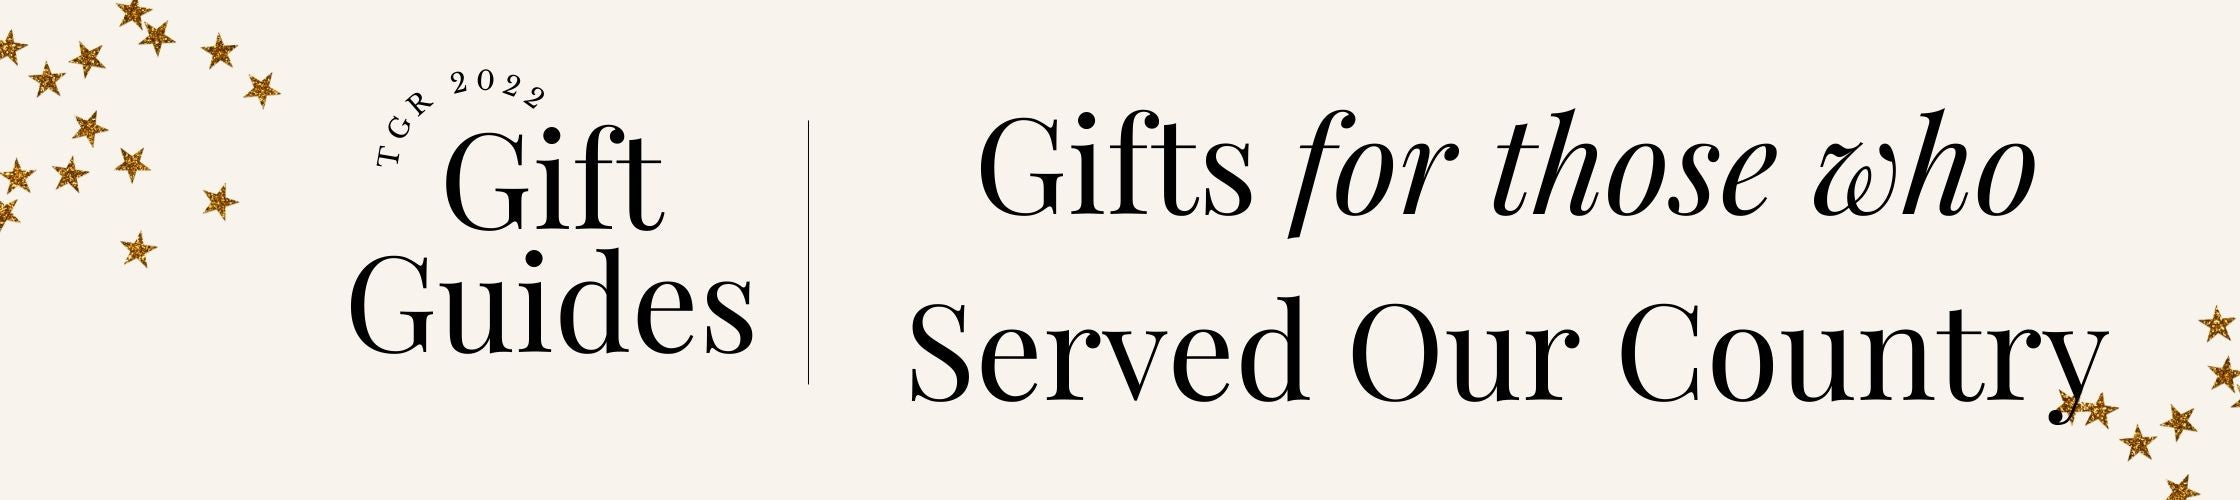 2022 Holiday Gift Guide: Gifts For Those Who Served Our Country